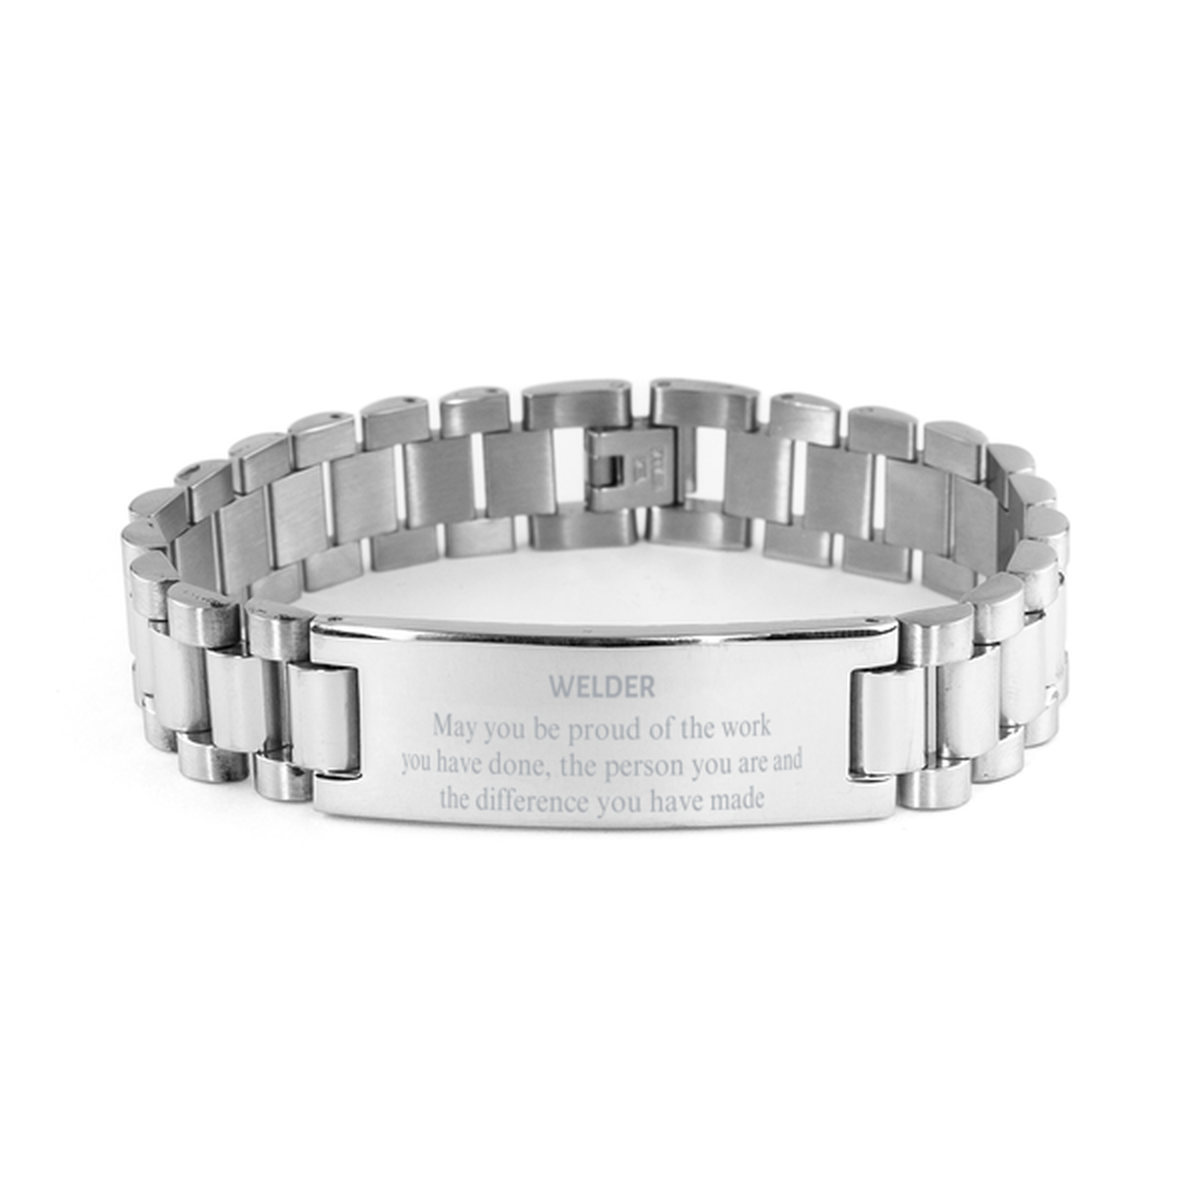 Welder May you be proud of the work you have done, Retirement Welder Ladder Stainless Steel Bracelet for Colleague Appreciation Gifts Amazing for Welder